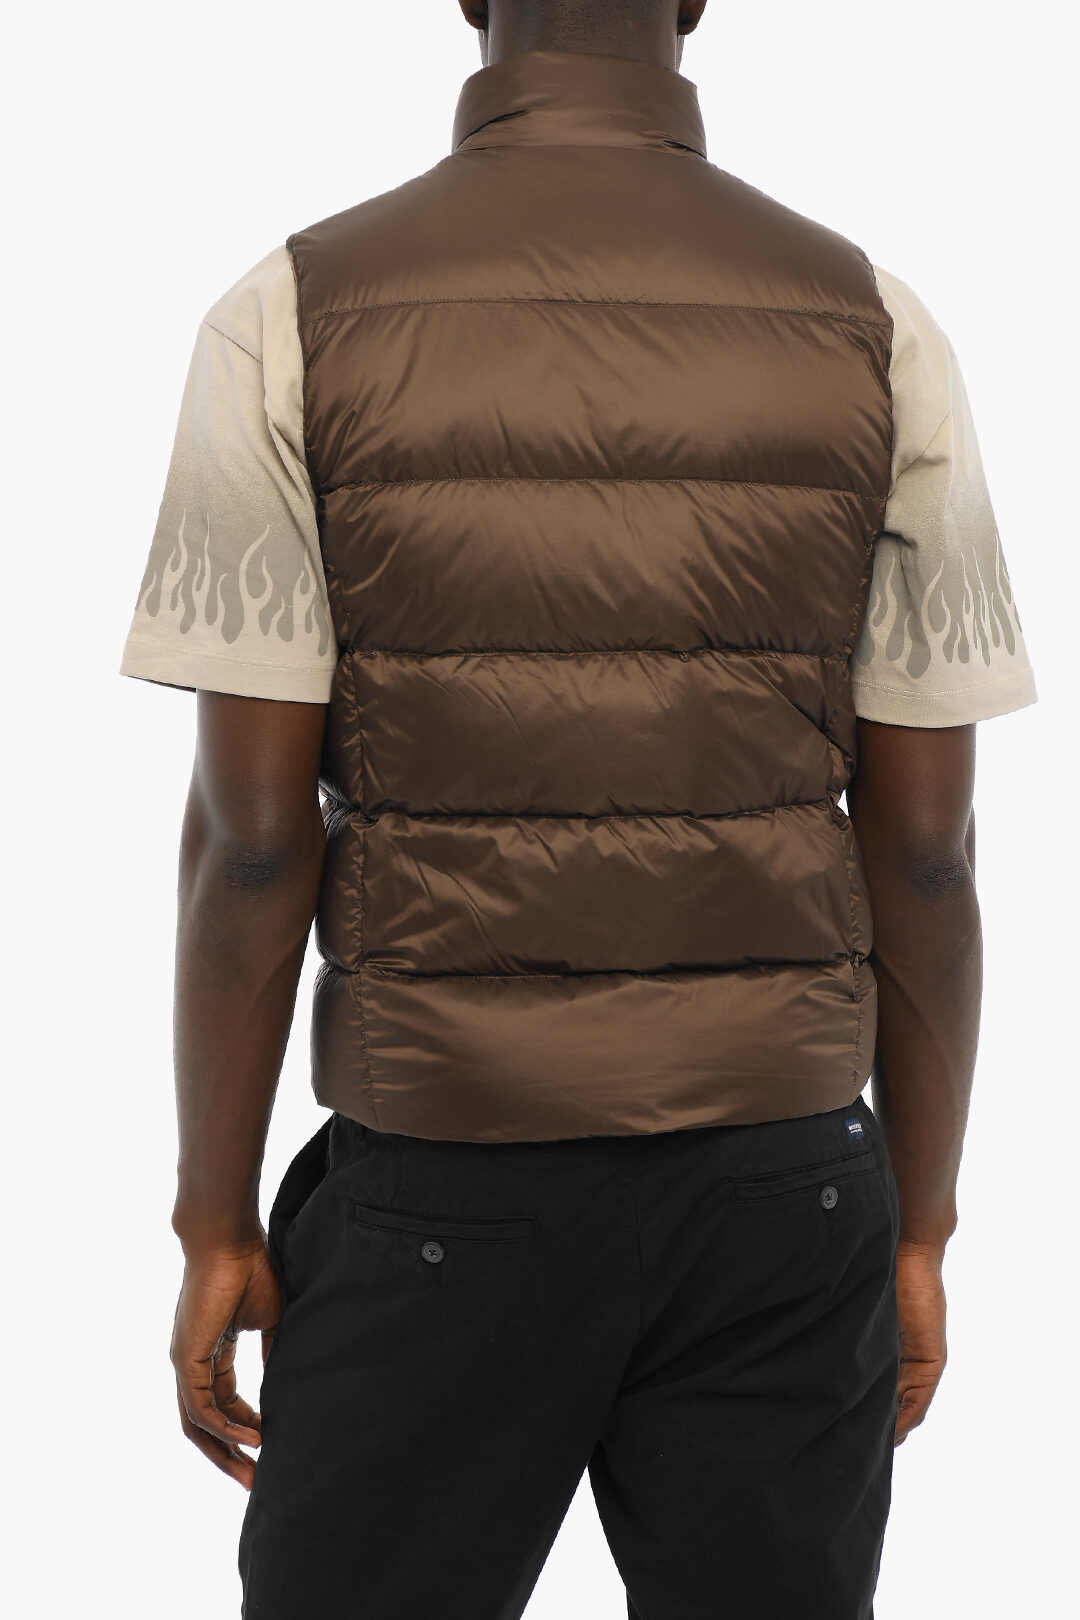 Woolrich Sleeveless Reversible Down Jacket men - Glamood Outlet